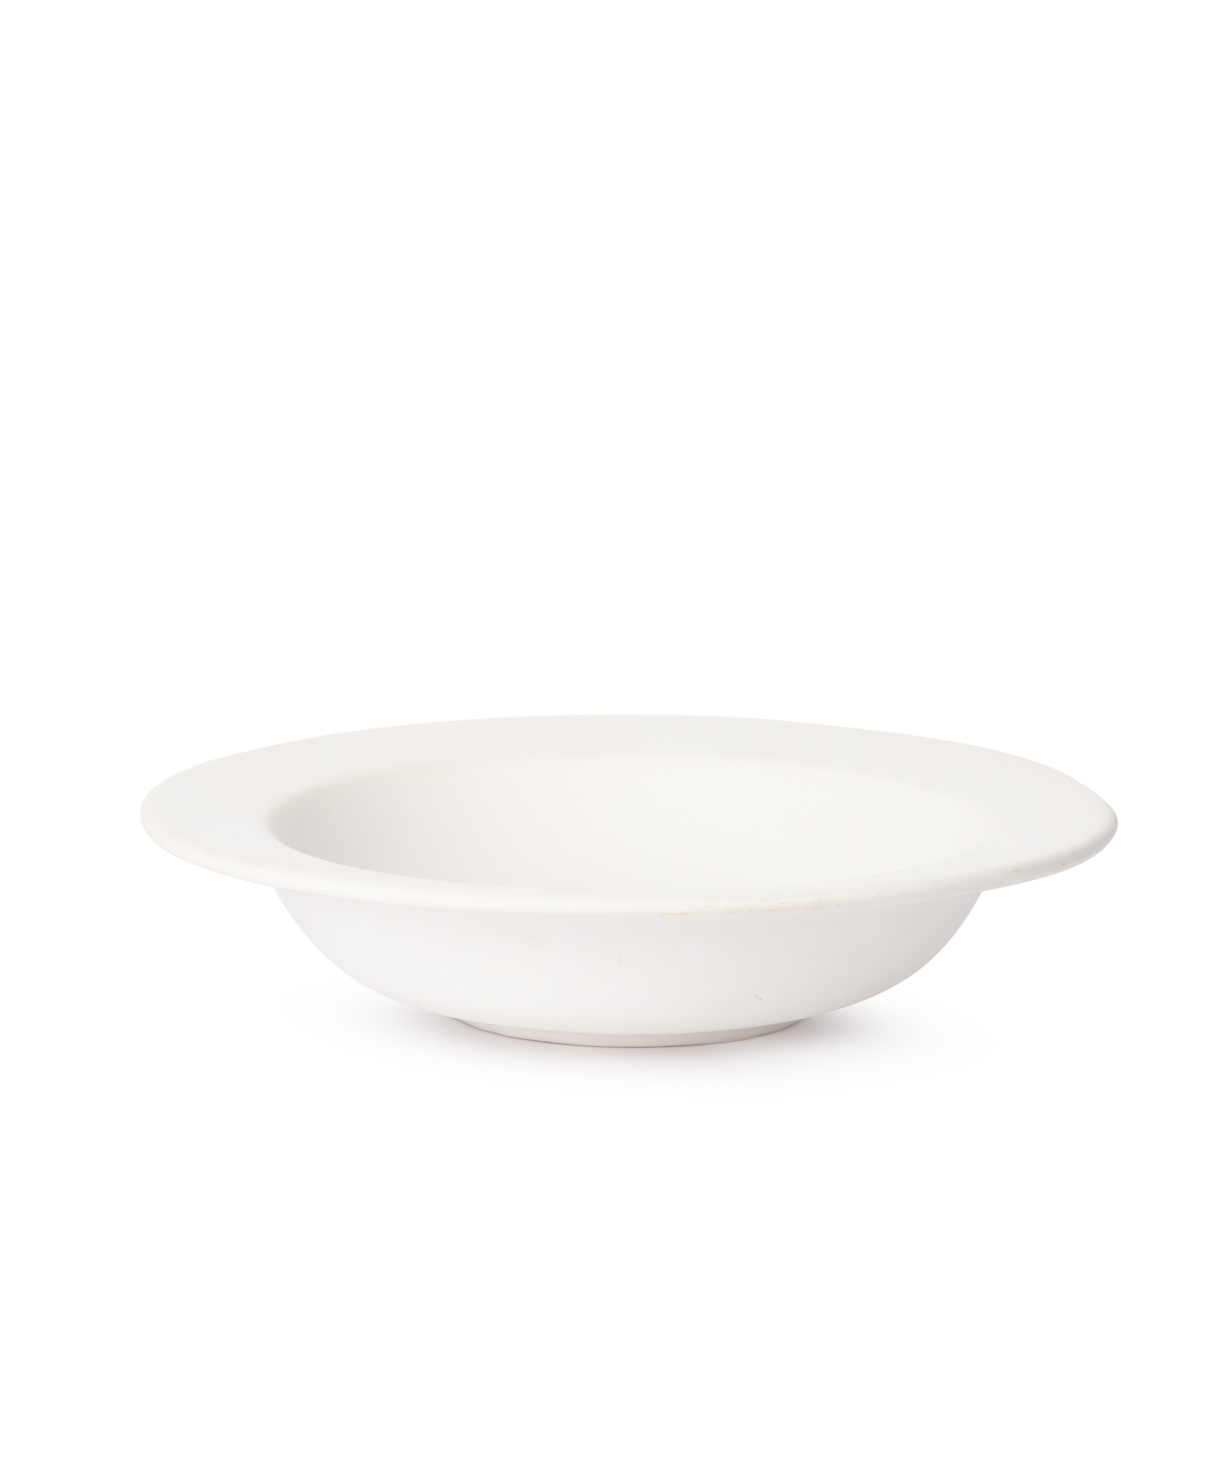 Collection `Yes Republic` art, pasta bowl